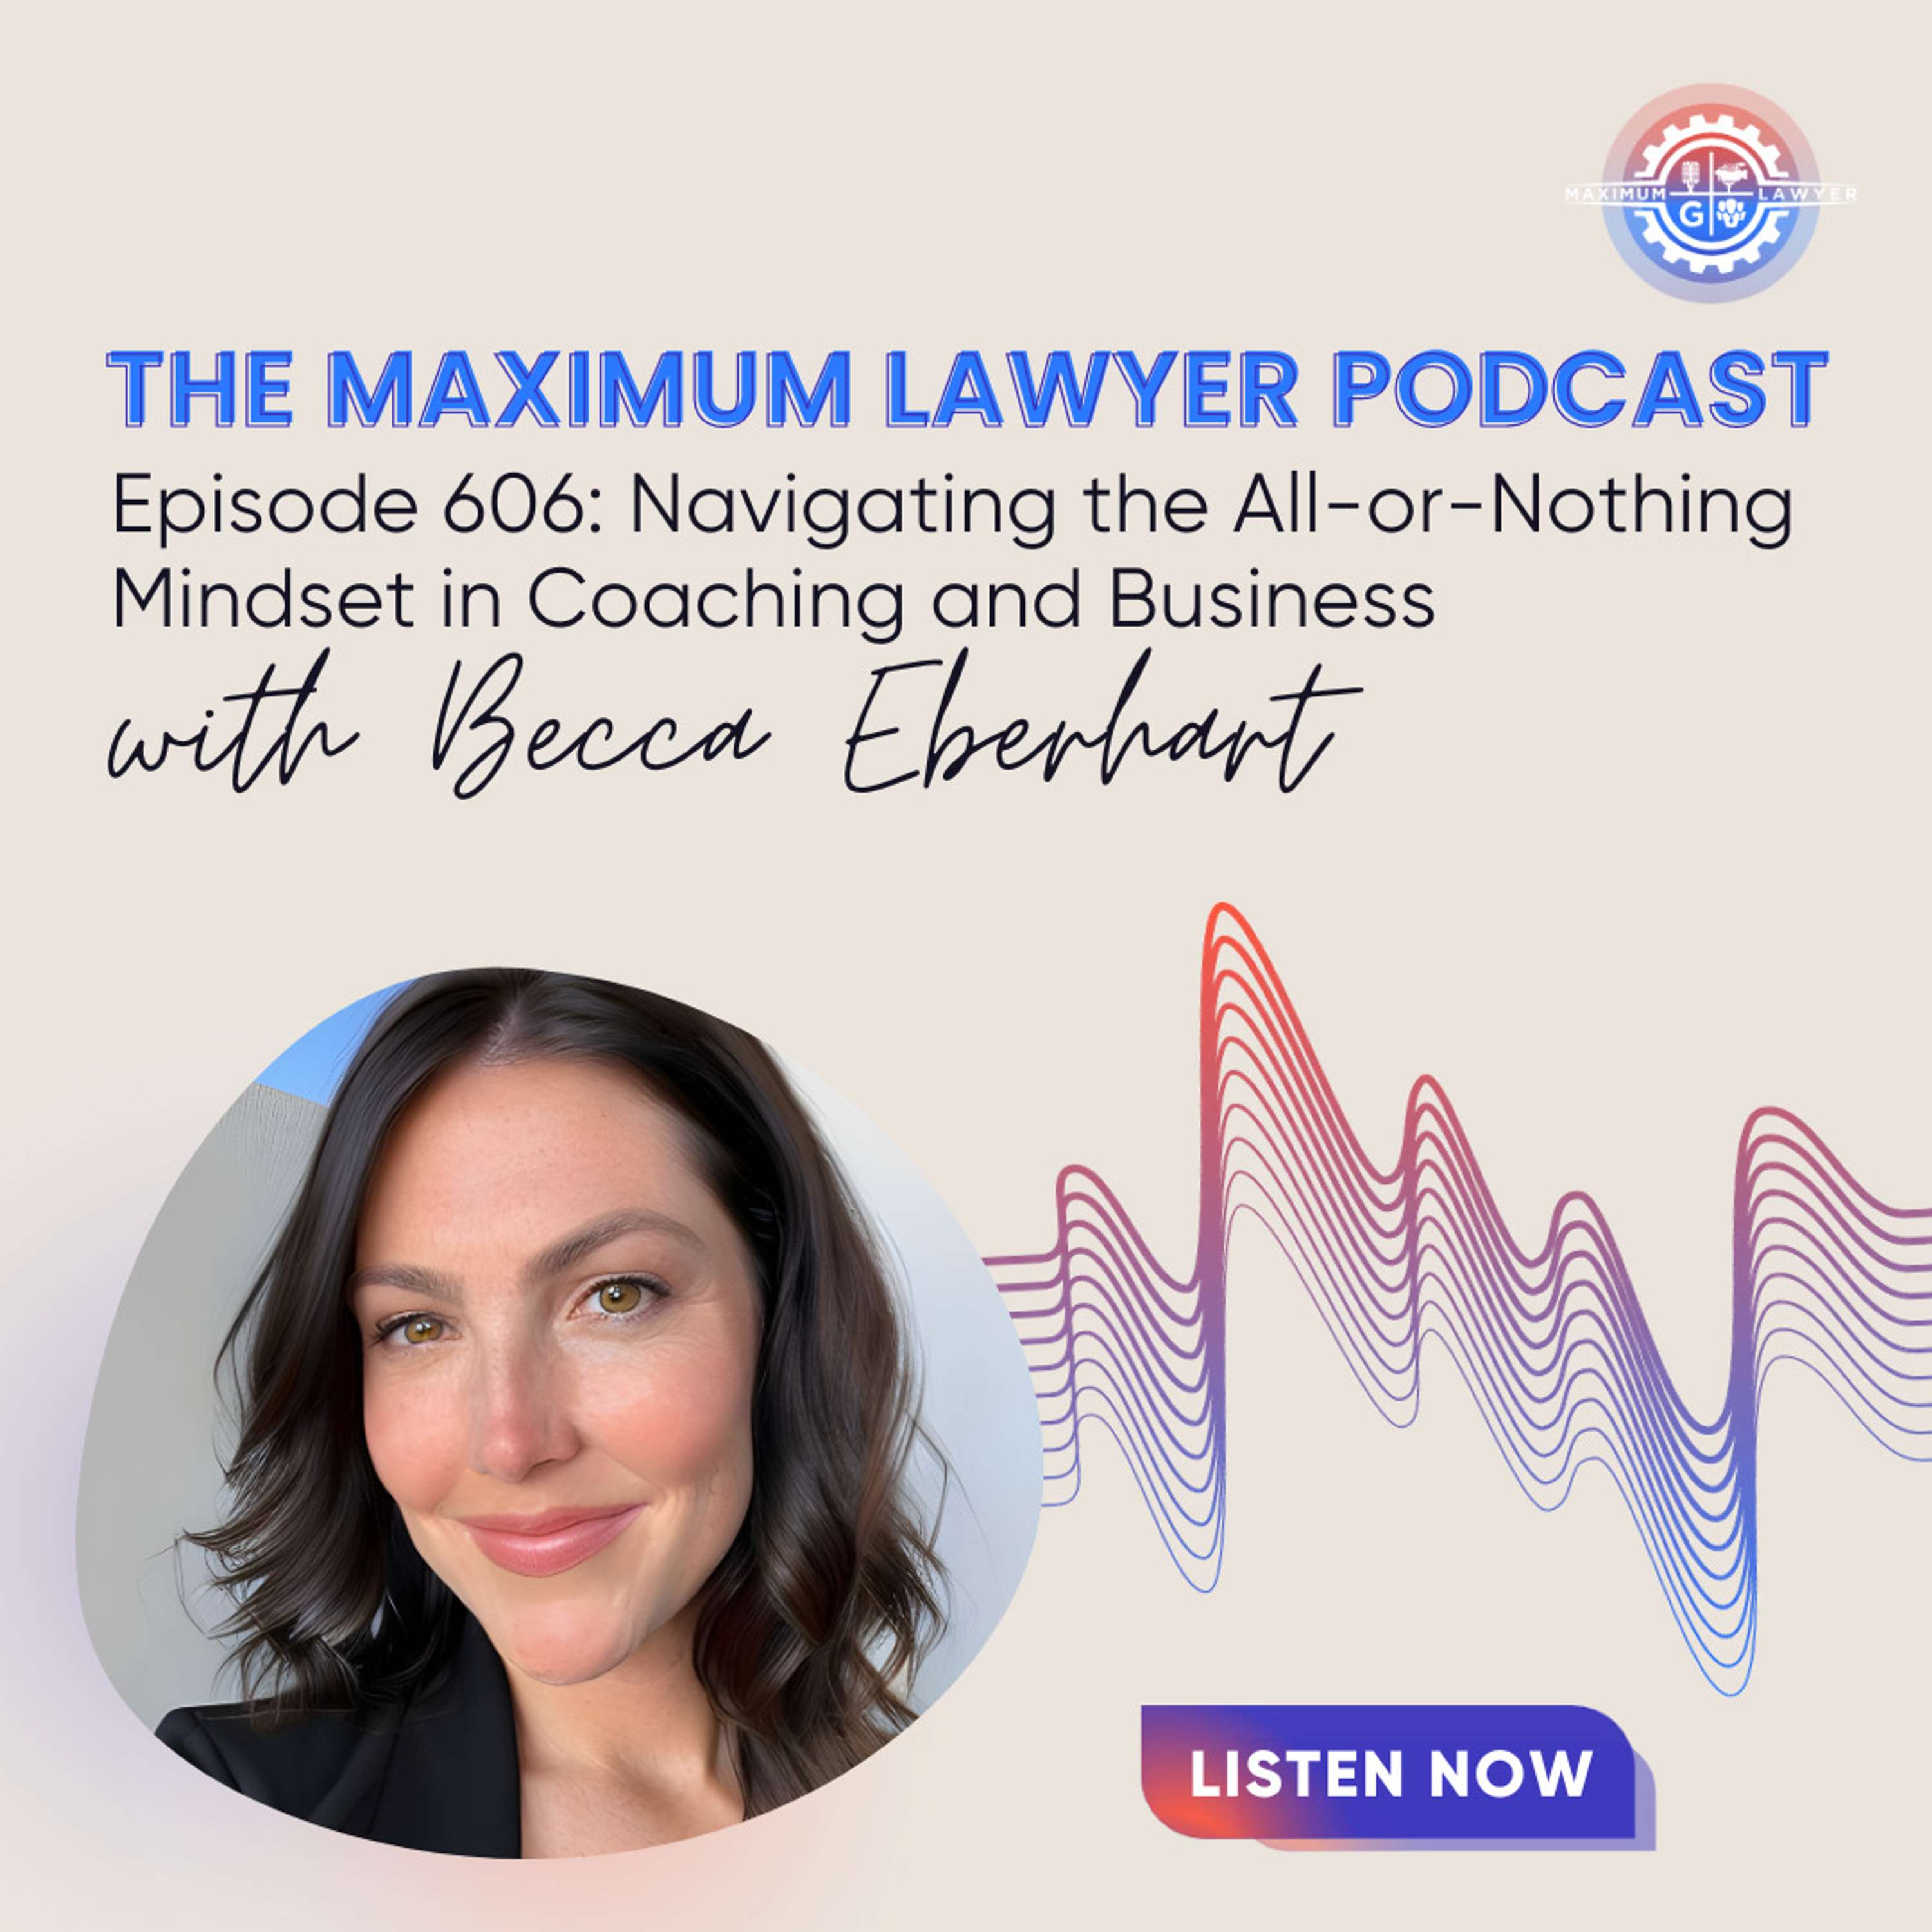 Navigating the All-or-Nothing Mindset in Coaching and Business